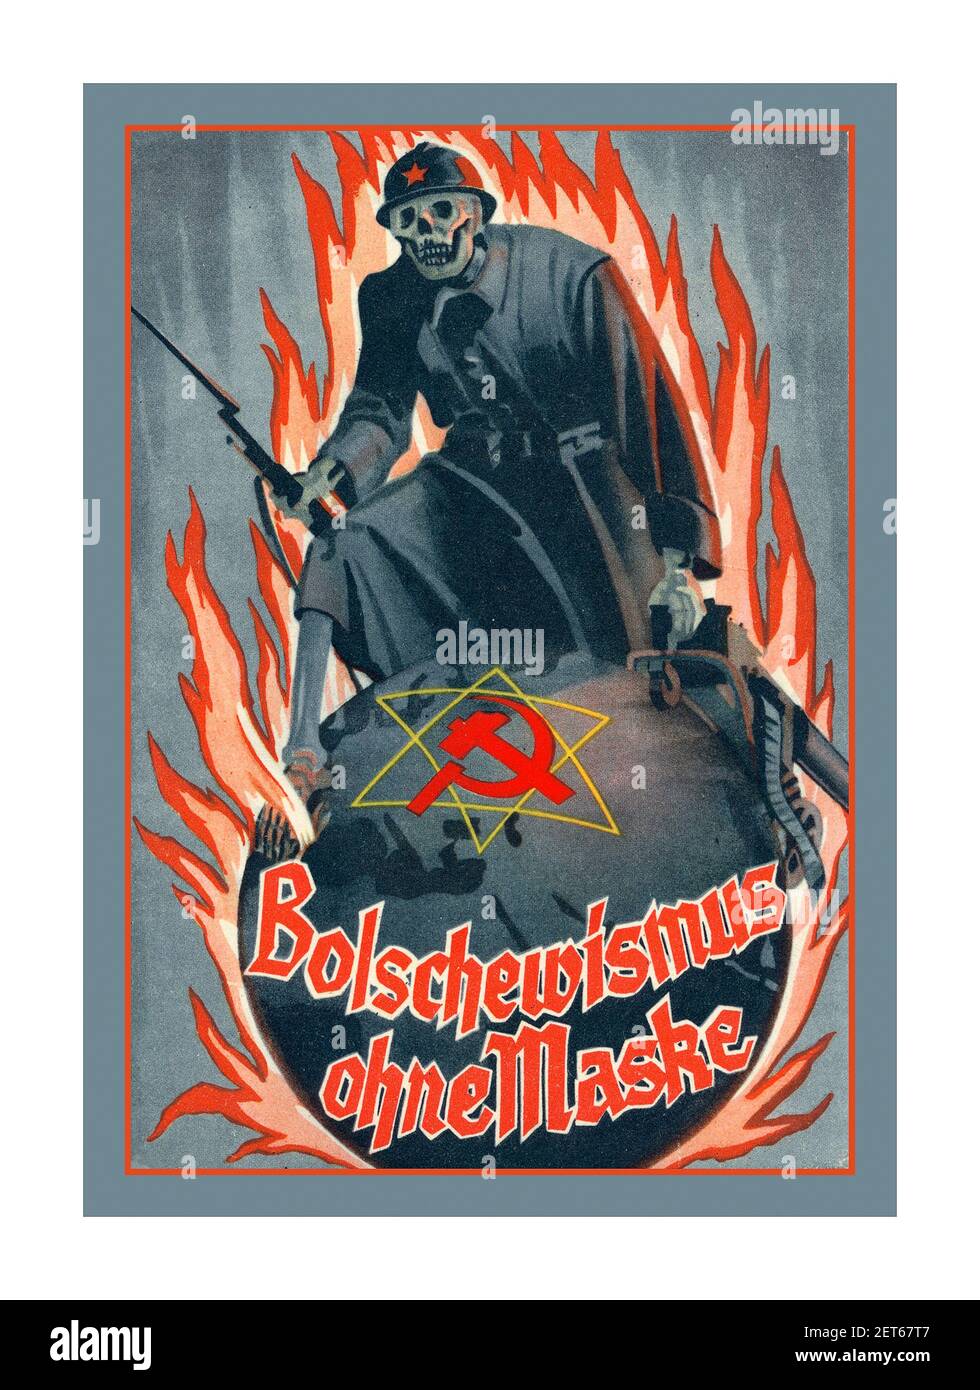 Vintage anti Bolshevism Propaganda Poster by Nazi Reich NSDAP 1939, 'Bolshevism without a mask', color poster card, for anti-Bolshevik exhibition Propaganda in Vienna Austria of the Reich Propaganda Department of the NSDAP Nazi Germany Stock Photo